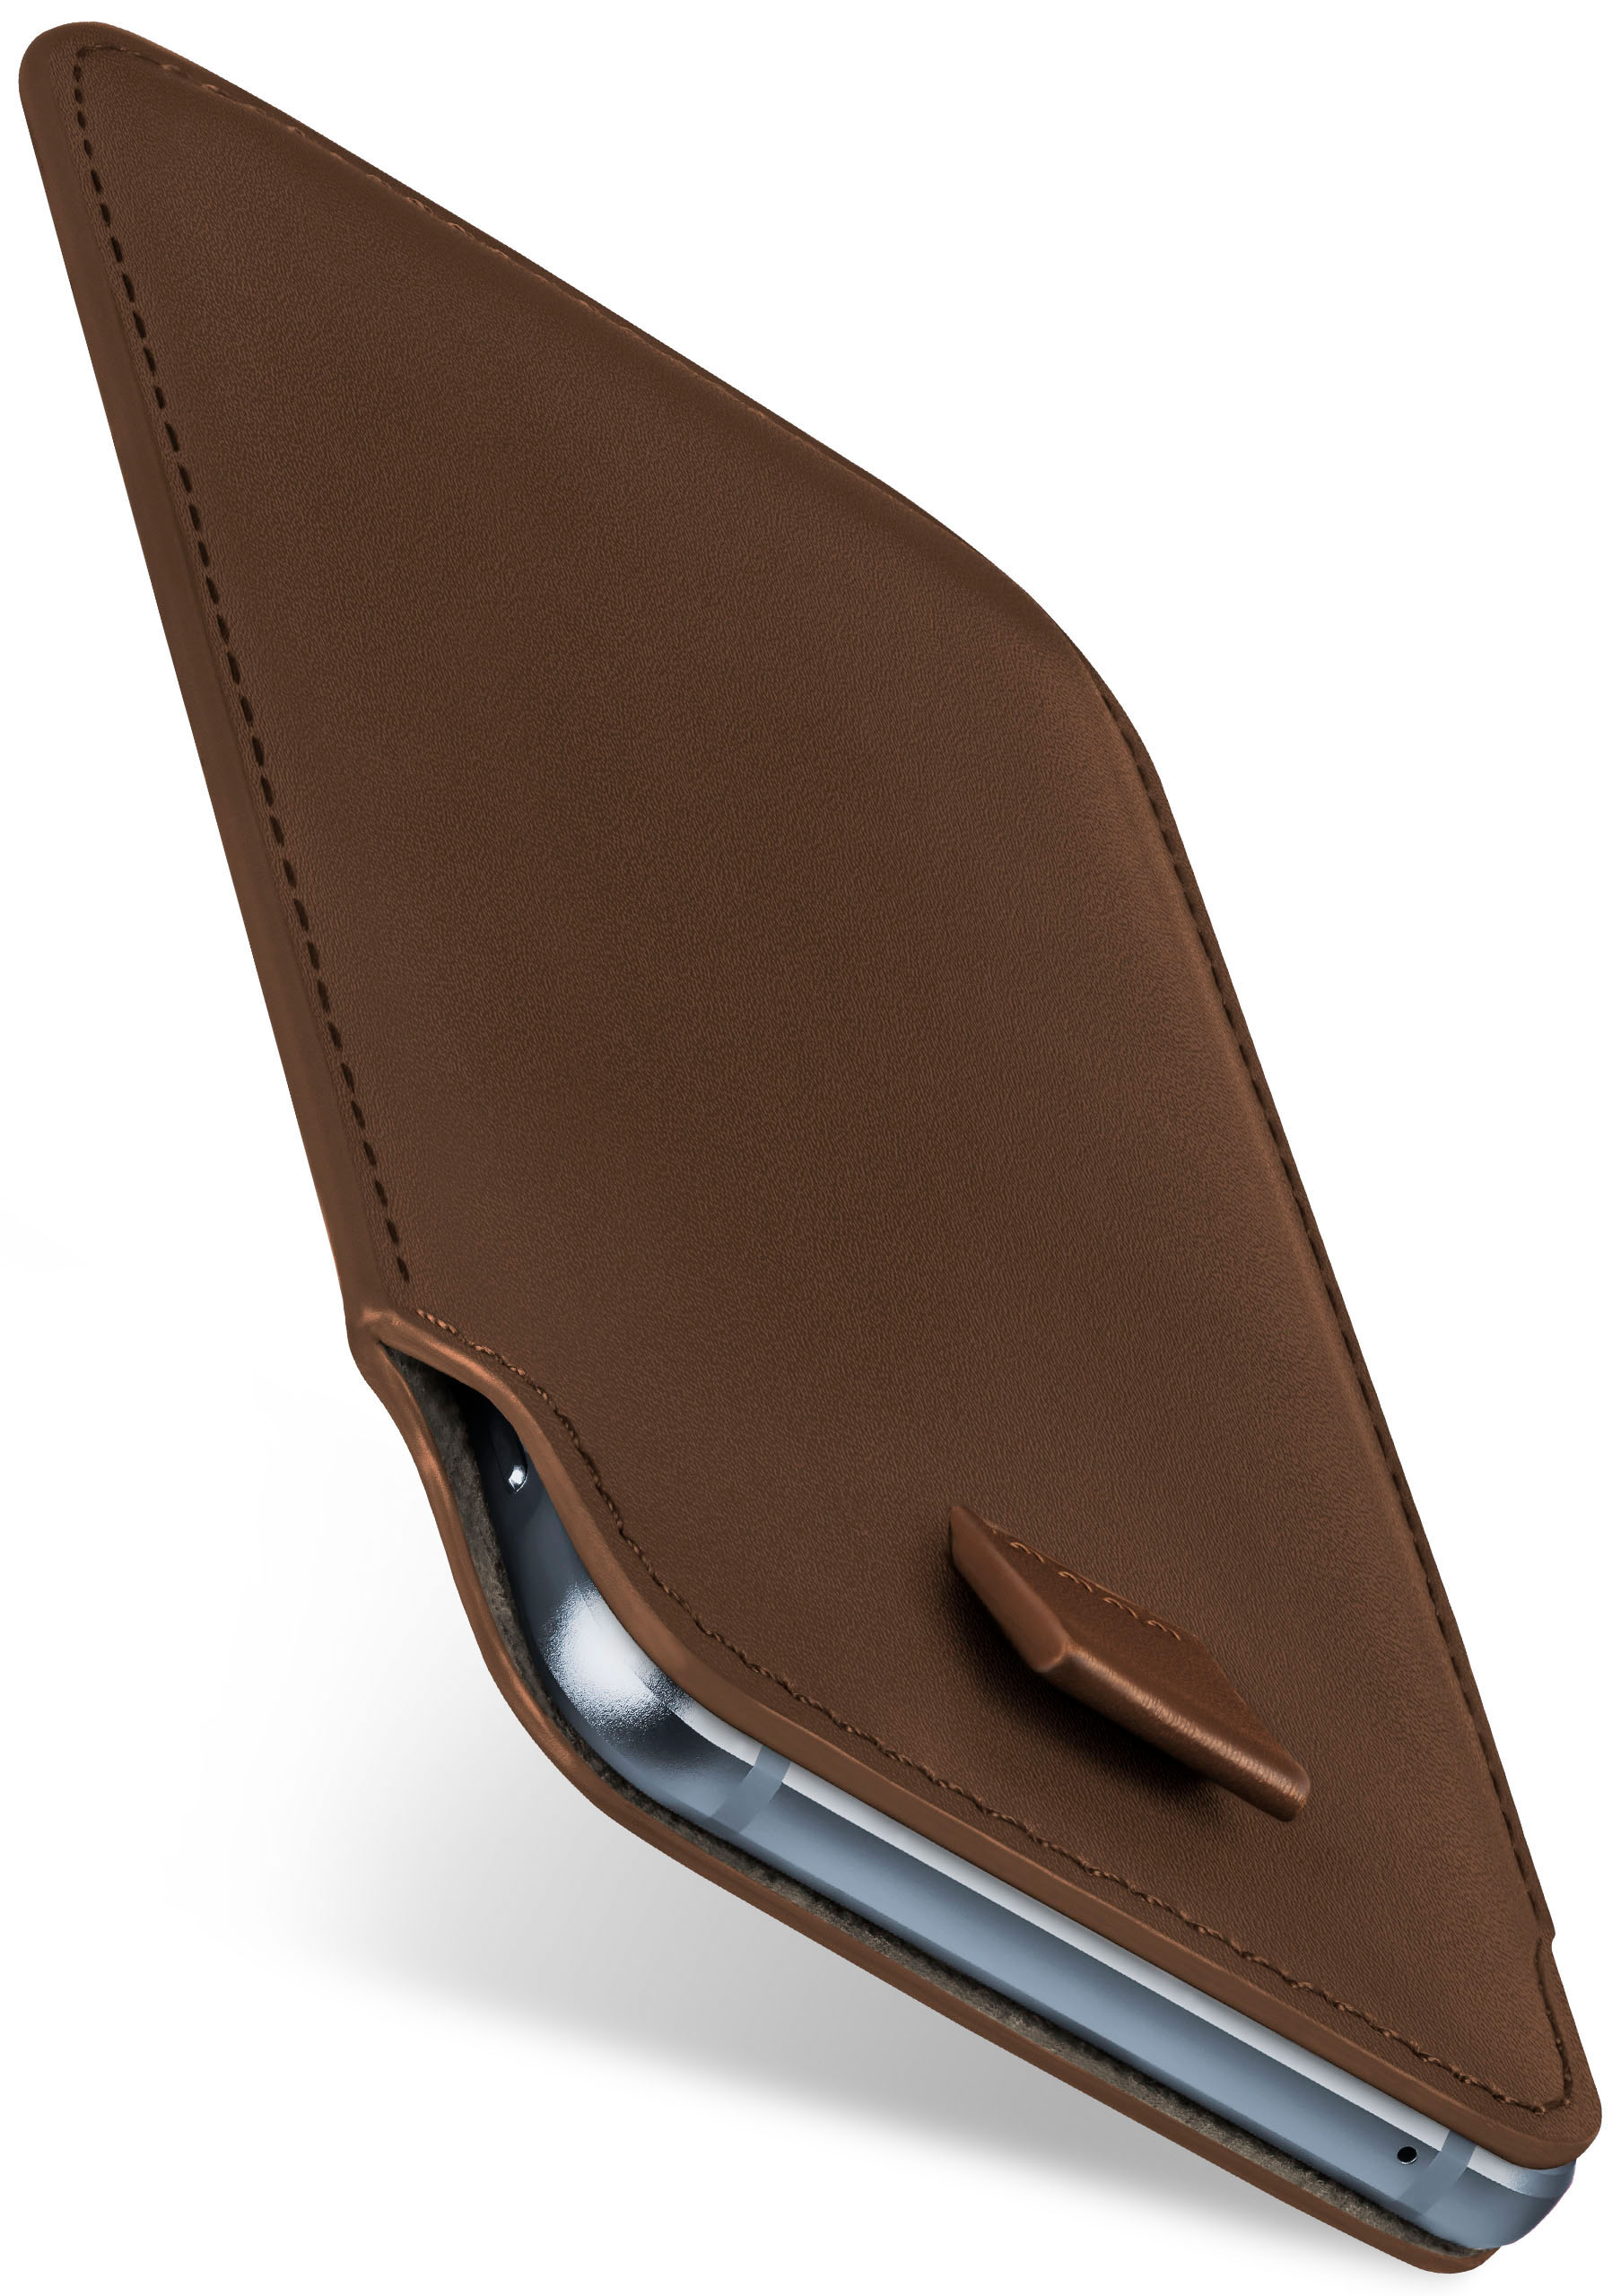 MOEX Slide Cover, Huawei, Pro, P20 Full Case, Oxide-Brown